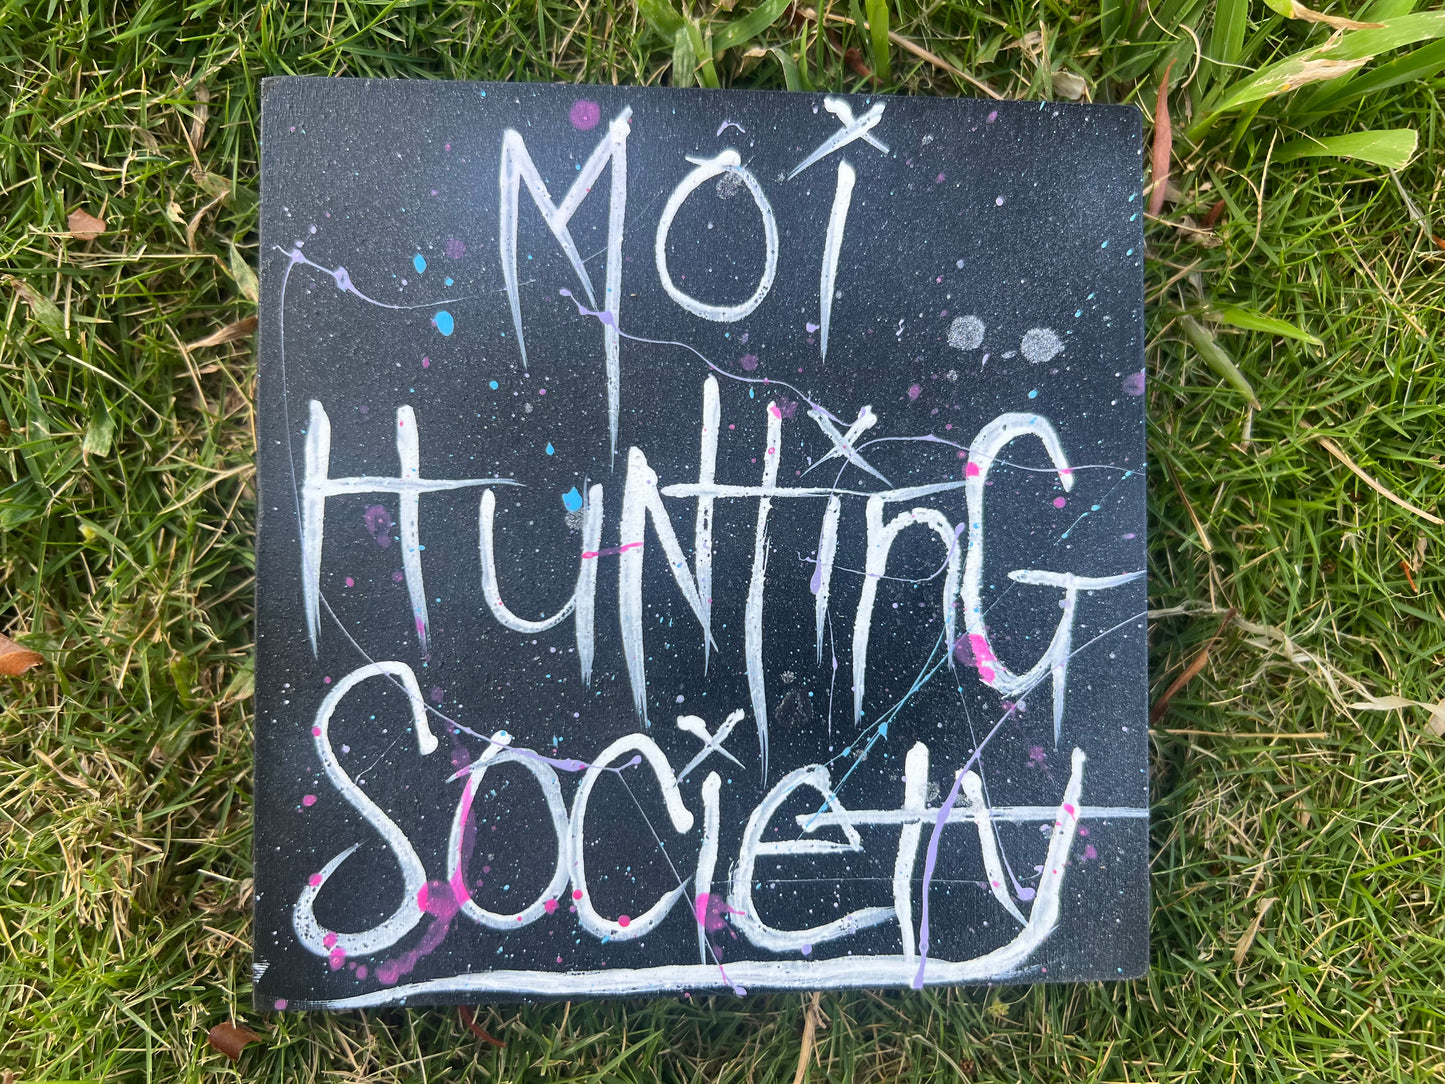 Moi Hunting Society 6"x6" Black and white wood panel sign. Sold with Moi/Papio Pack